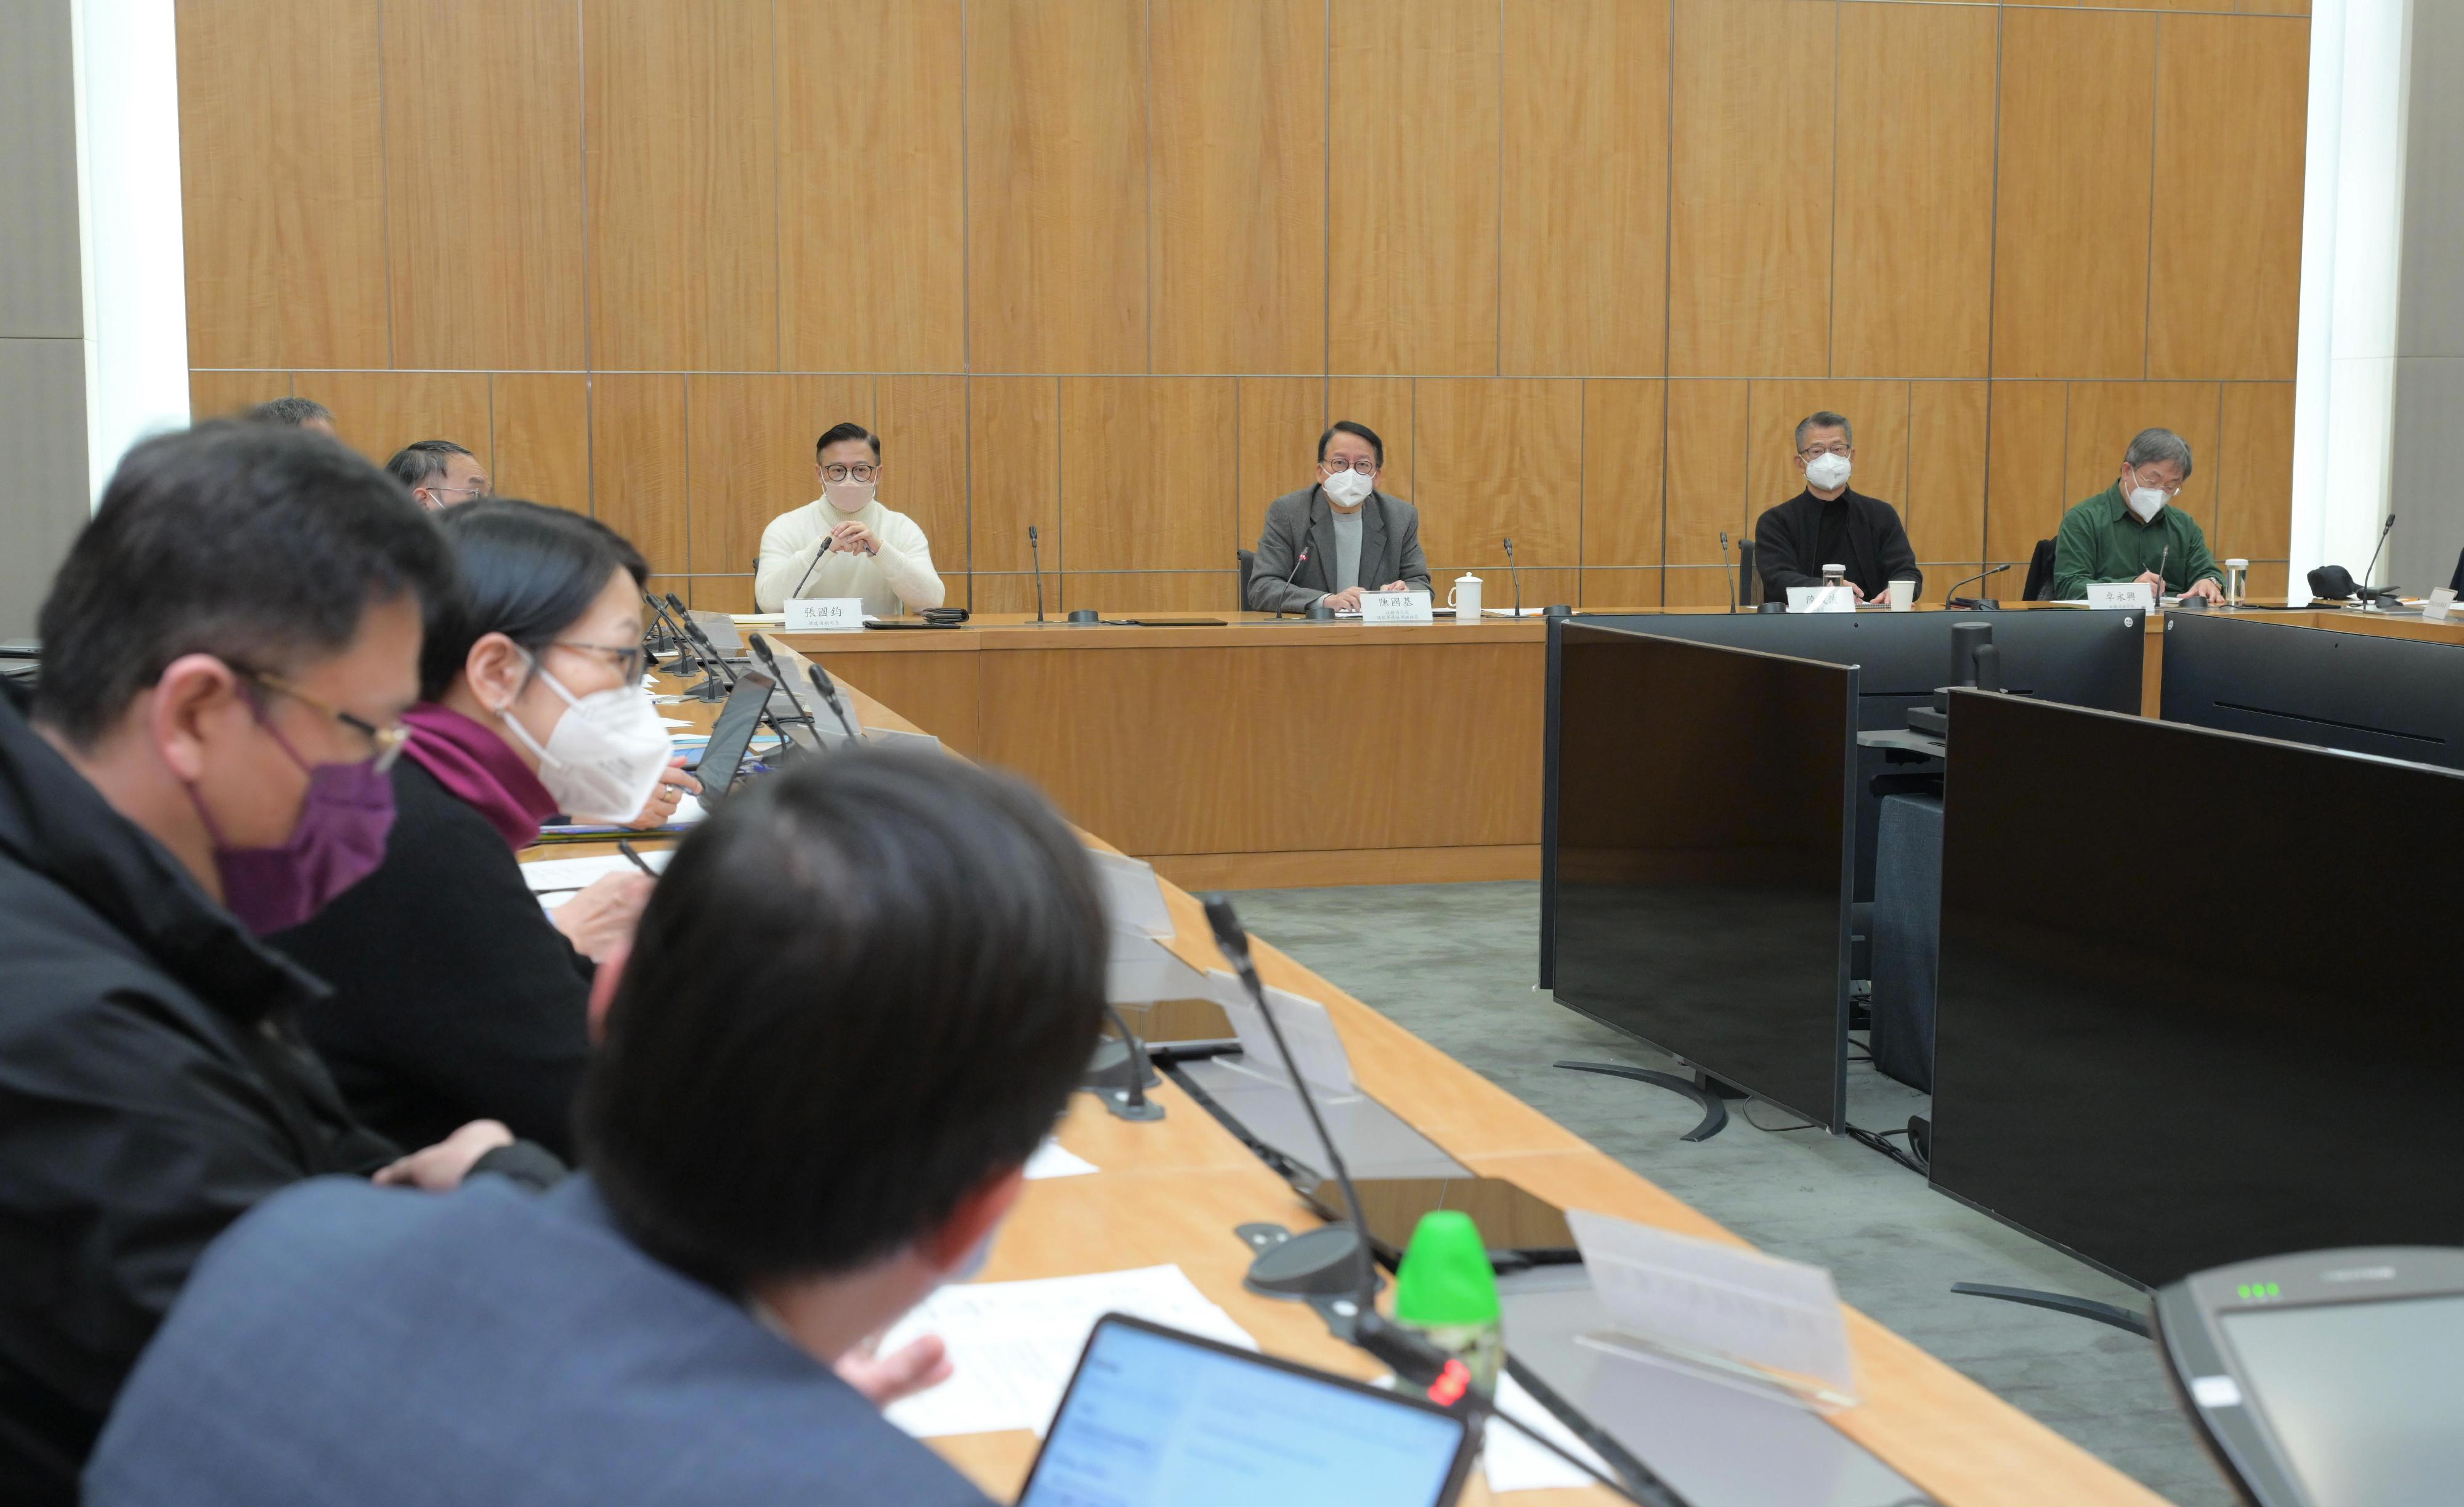 The Co-ordination Group on Resumption of Normal Travel, led by the Chief Secretary for Administration, Mr Chan Kwok-ki, convened the first meeting today (December 25) at the Central Government Offices.